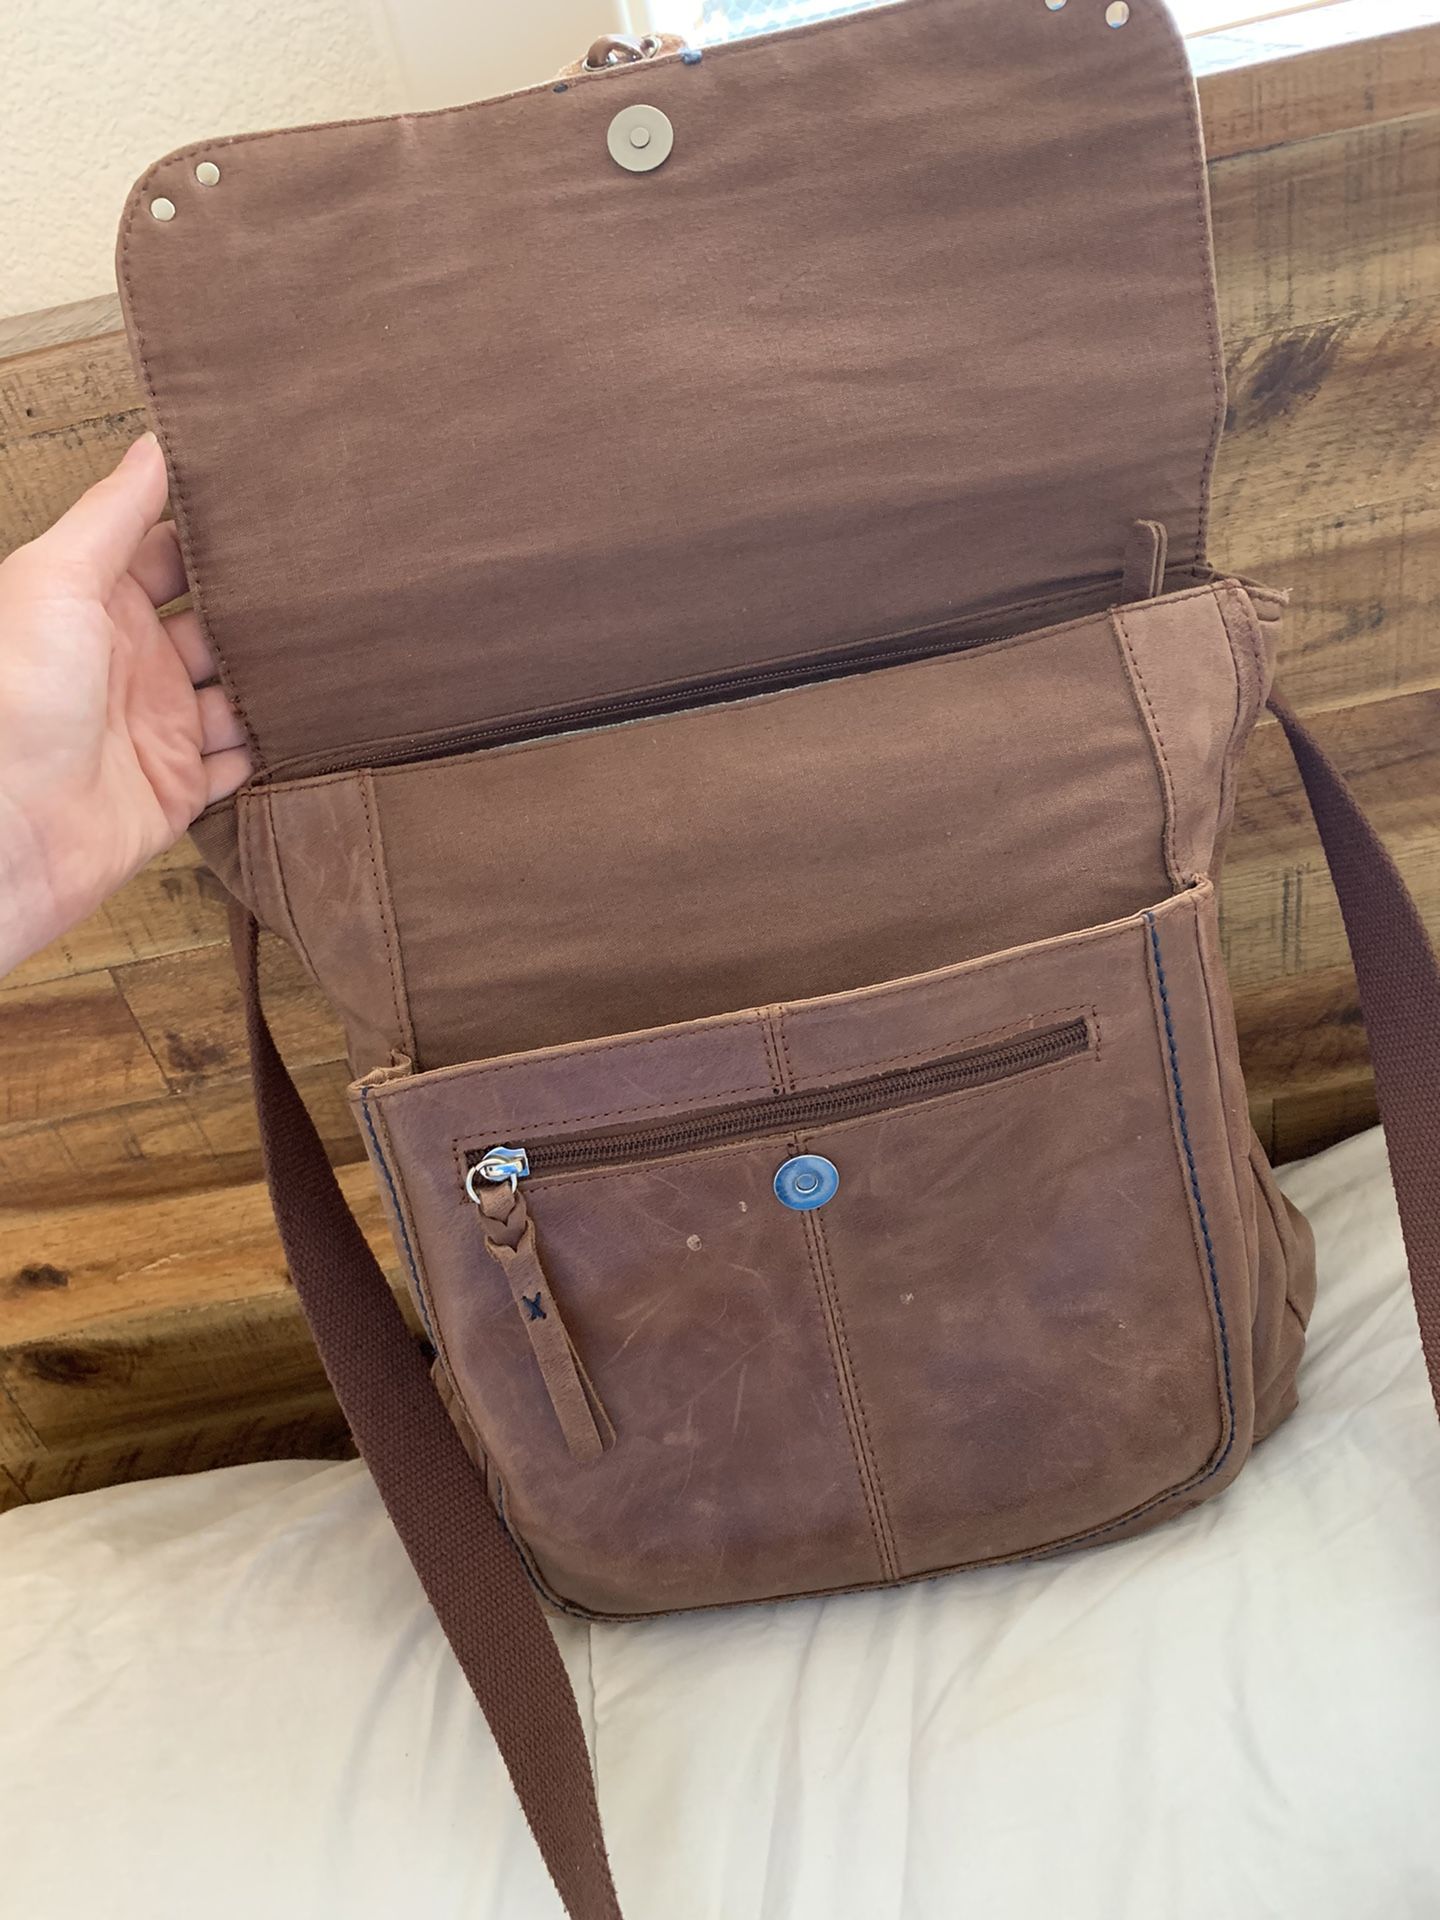 New DKNY Tan/Brown Saffiano Leather Backpack Bag for Sale in Tacoma, WA -  OfferUp